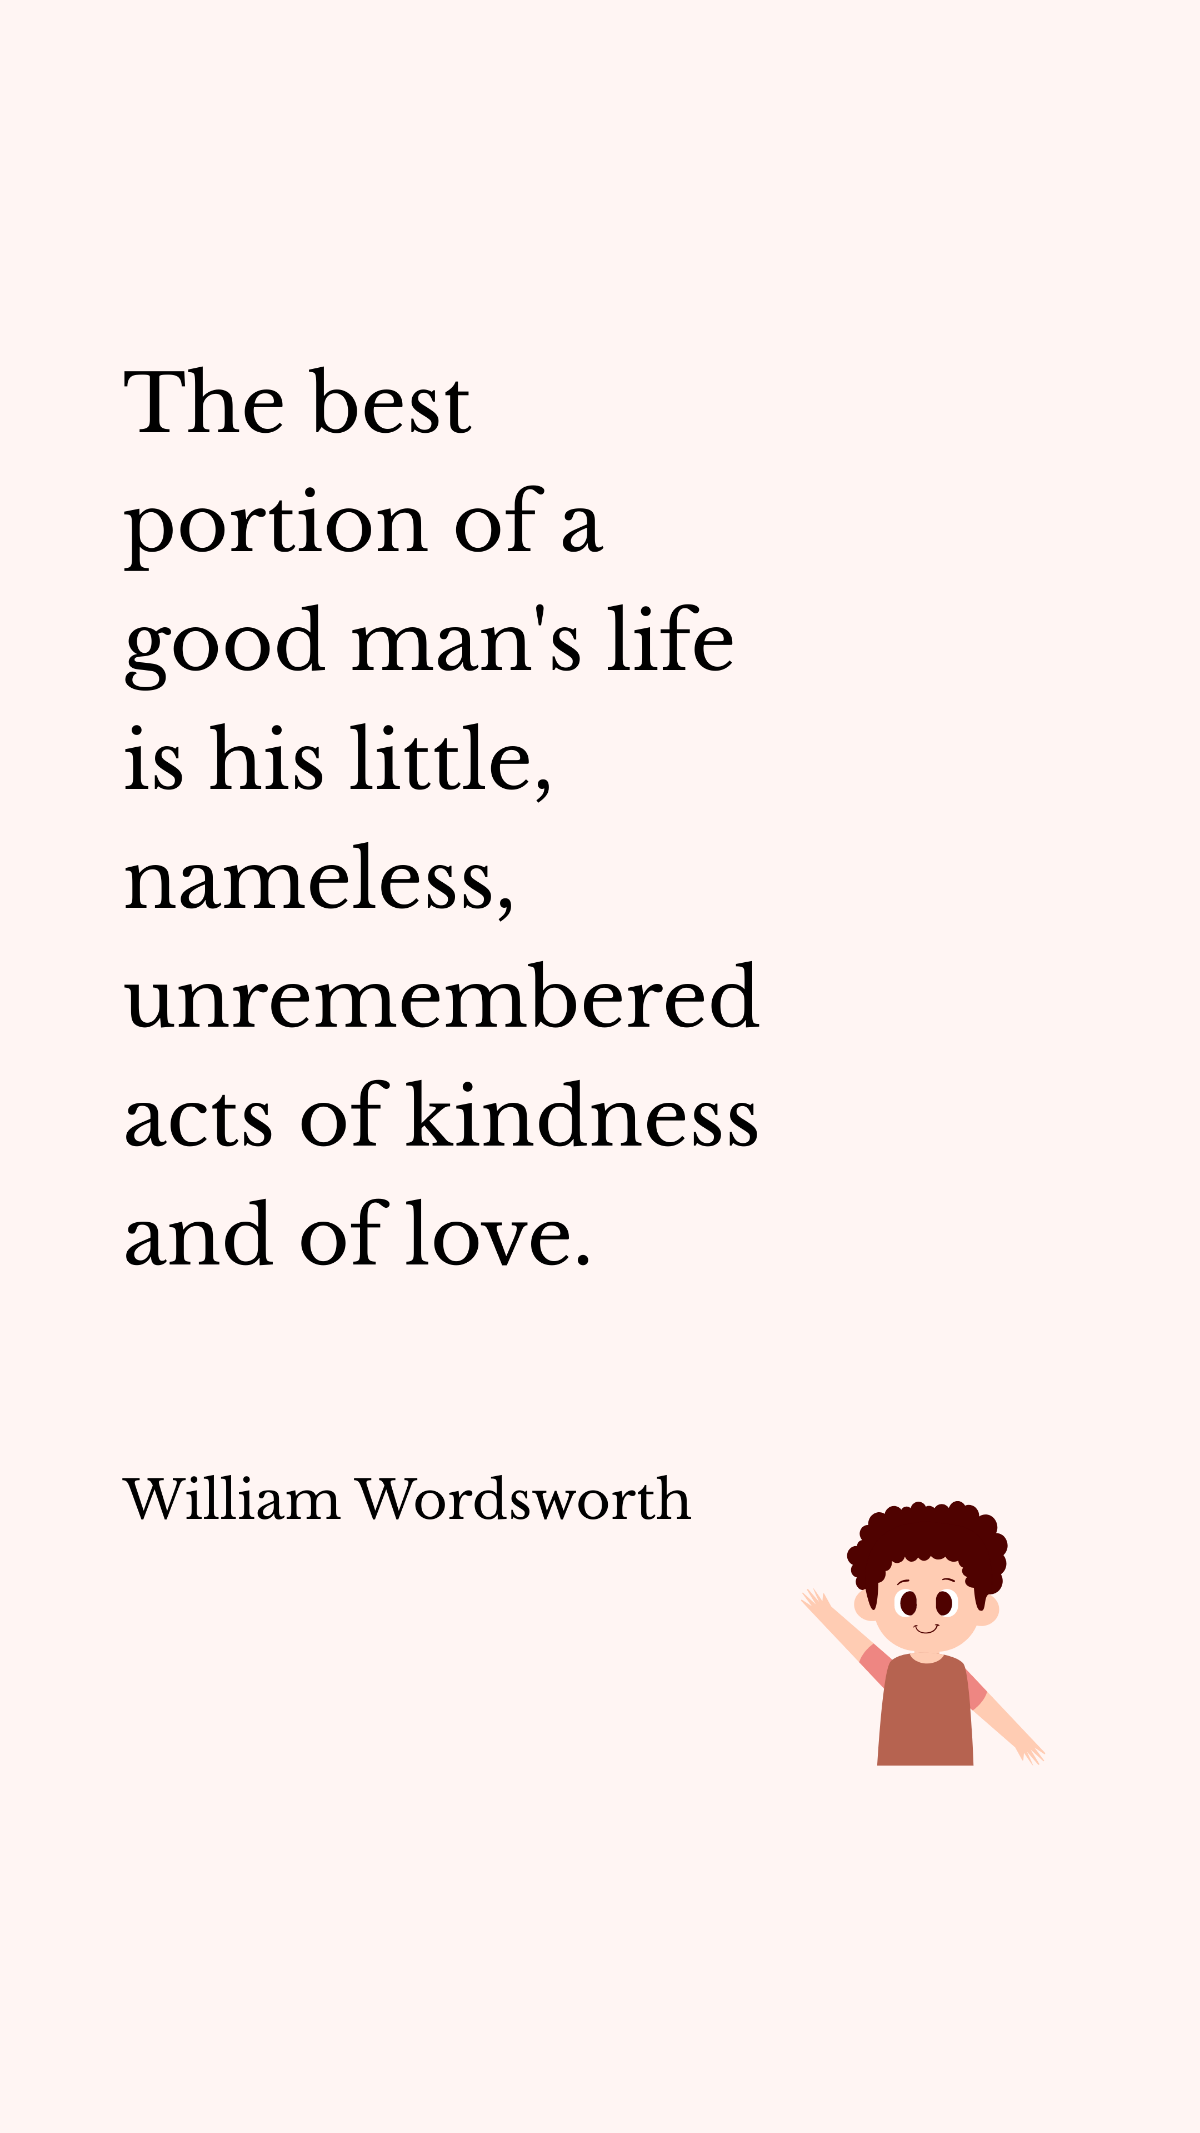 William Wordsworth - The best portion of a good man's life is his little, nameless, unremembered acts of kindness and of love. 